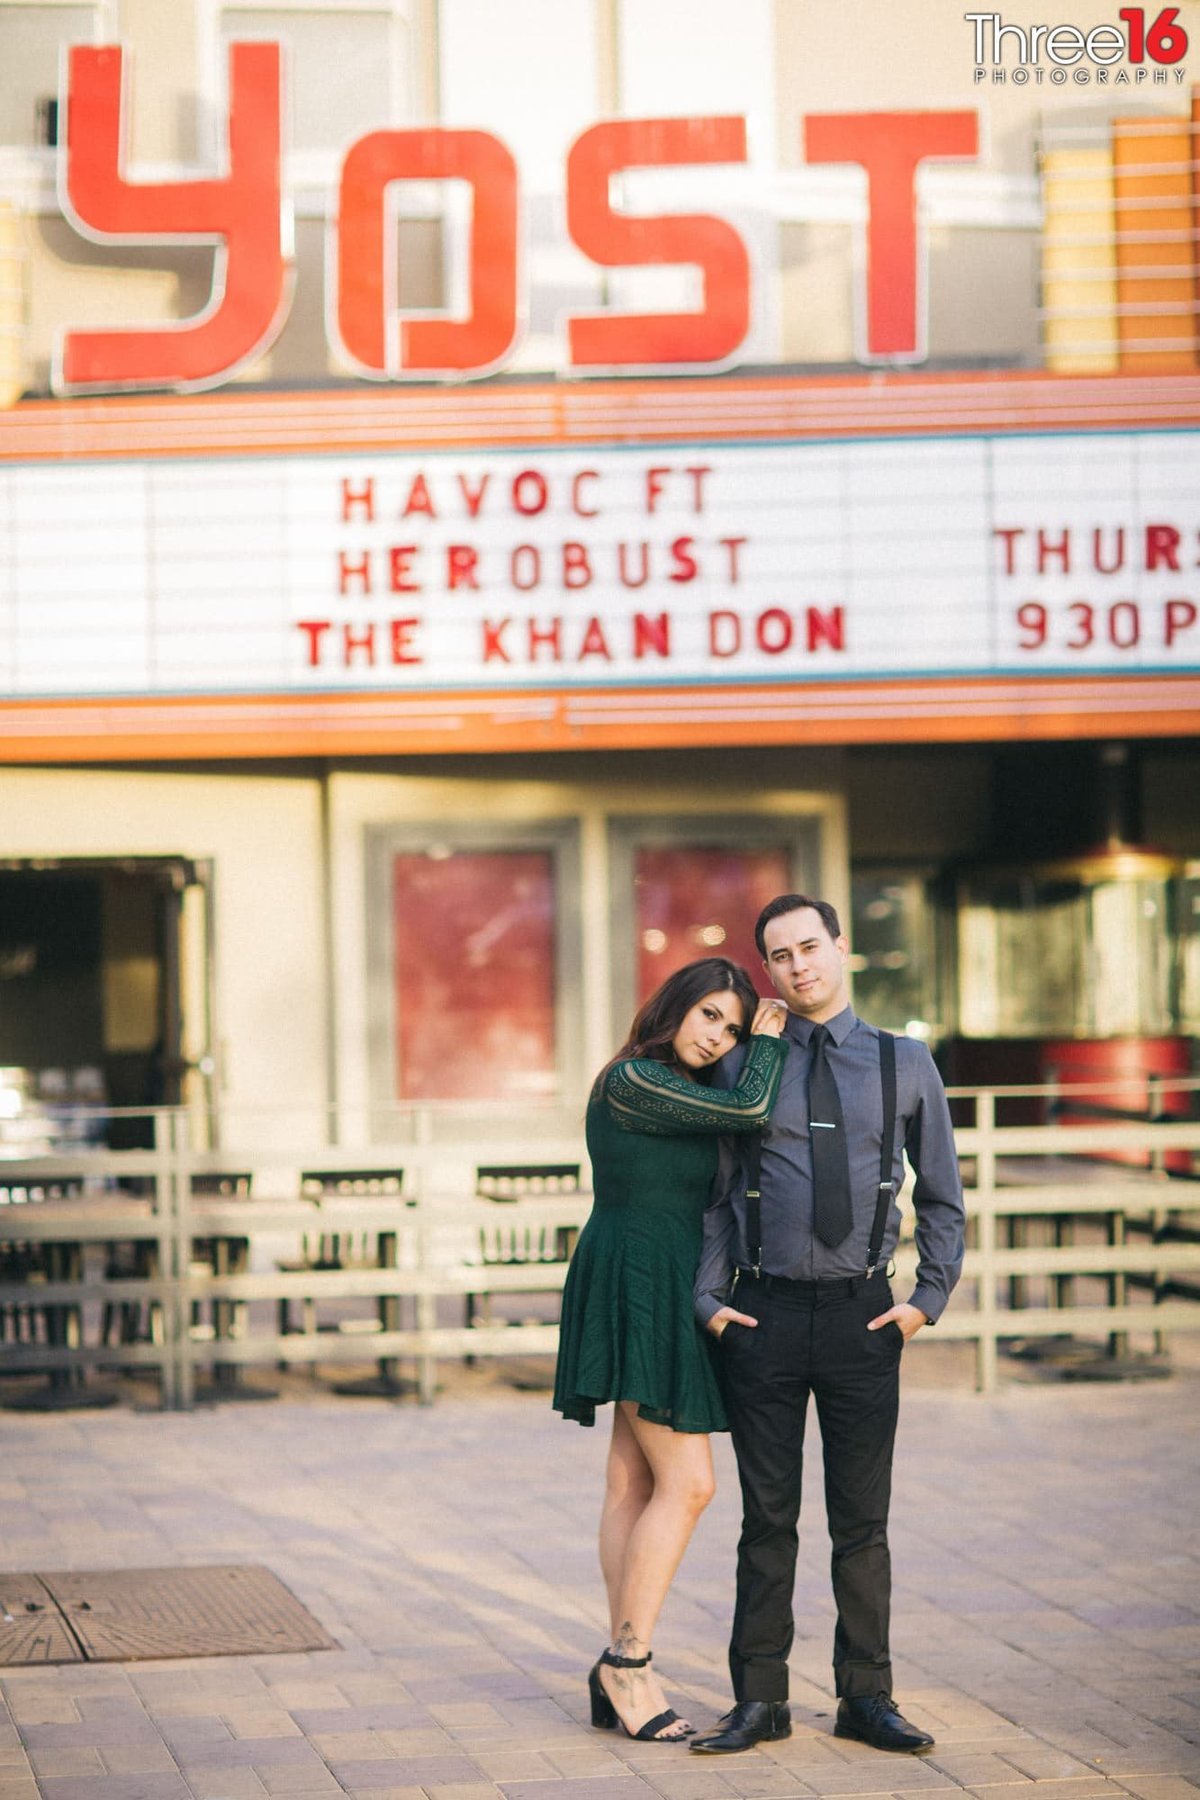 Bride to be rests her head on her Groom's shoulder while standing in front of the Yost Theater in Santa Ana